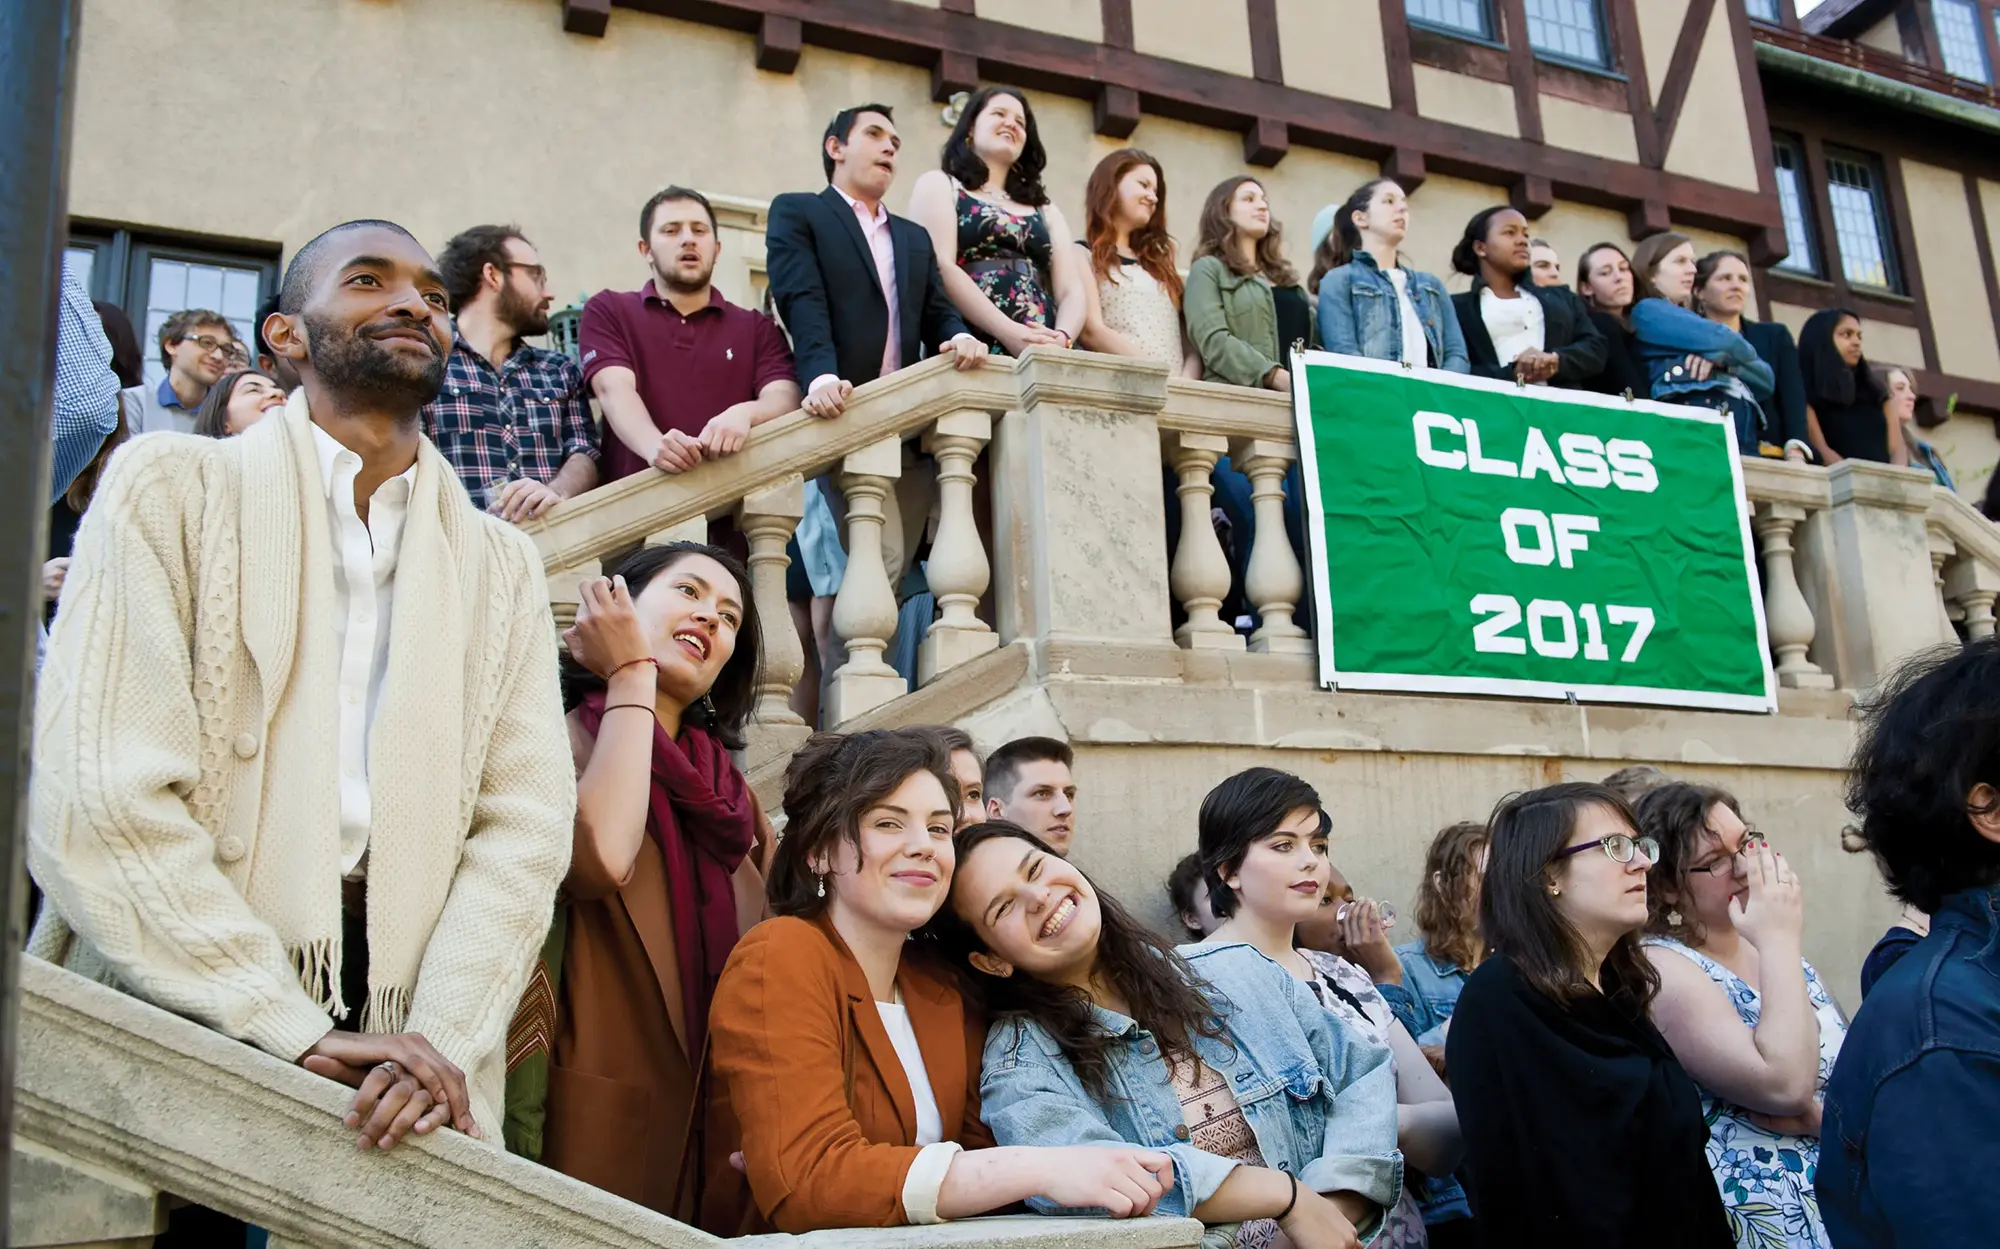 Students gathered outside alumnae house with Class of 2017 green banner